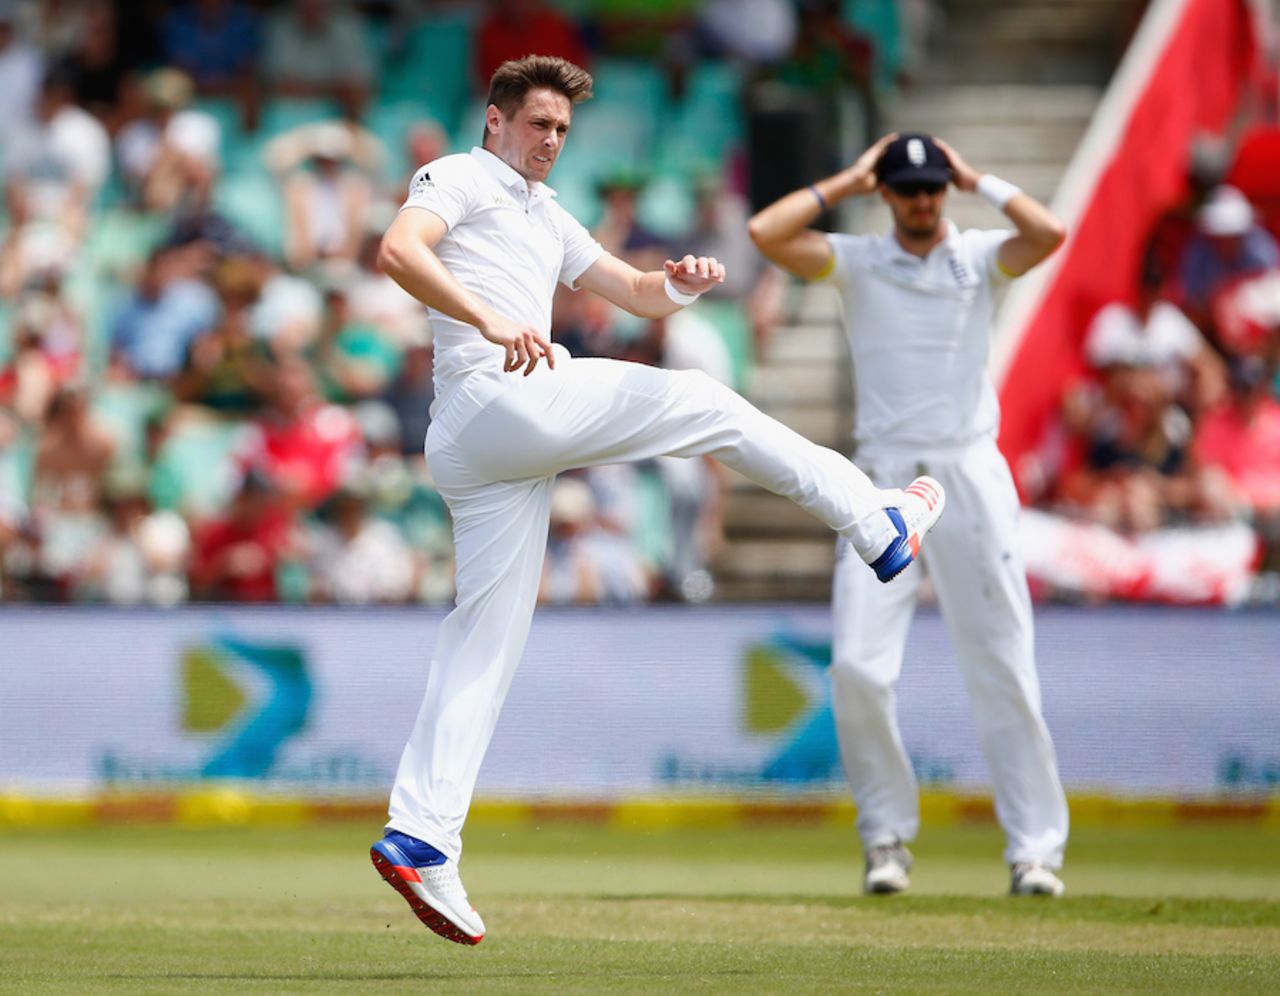 Chris Woakes reacts after an edge off Hashim Amla is dropped, South Africa v England, 1st Test, Durban, 2nd day, December 27, 2015